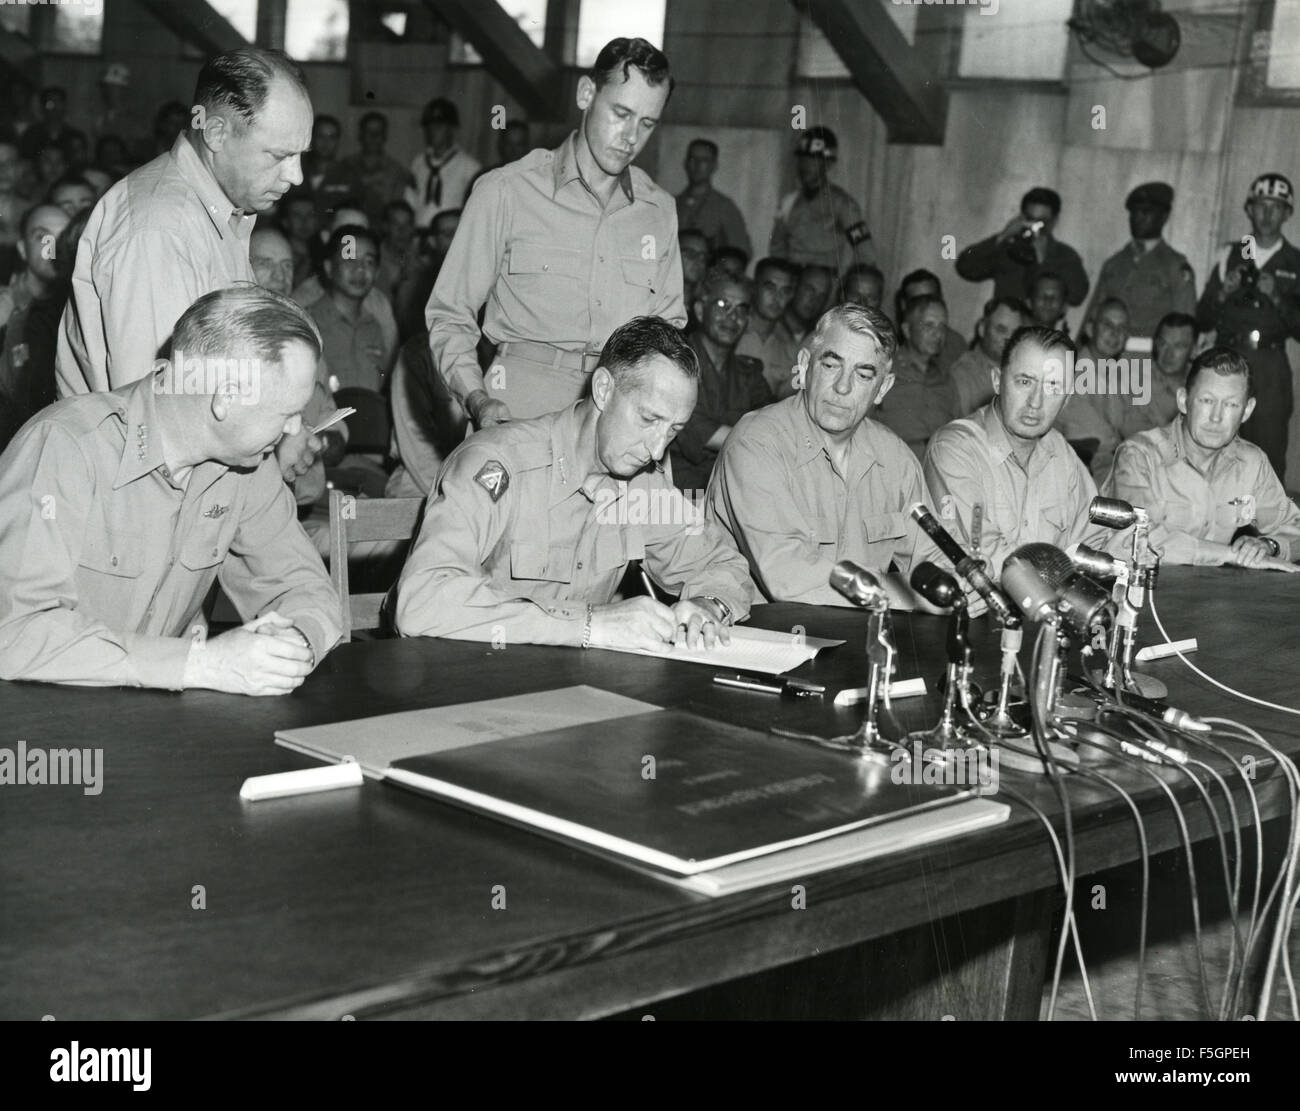 KOREAN WAR ARMISTICE  signed at Panmunjon 27 July 1953. US Army Lieutenant General William Harrison Jnr signs on behalf of the United Nations Command. Photo US Navy Stock Photo